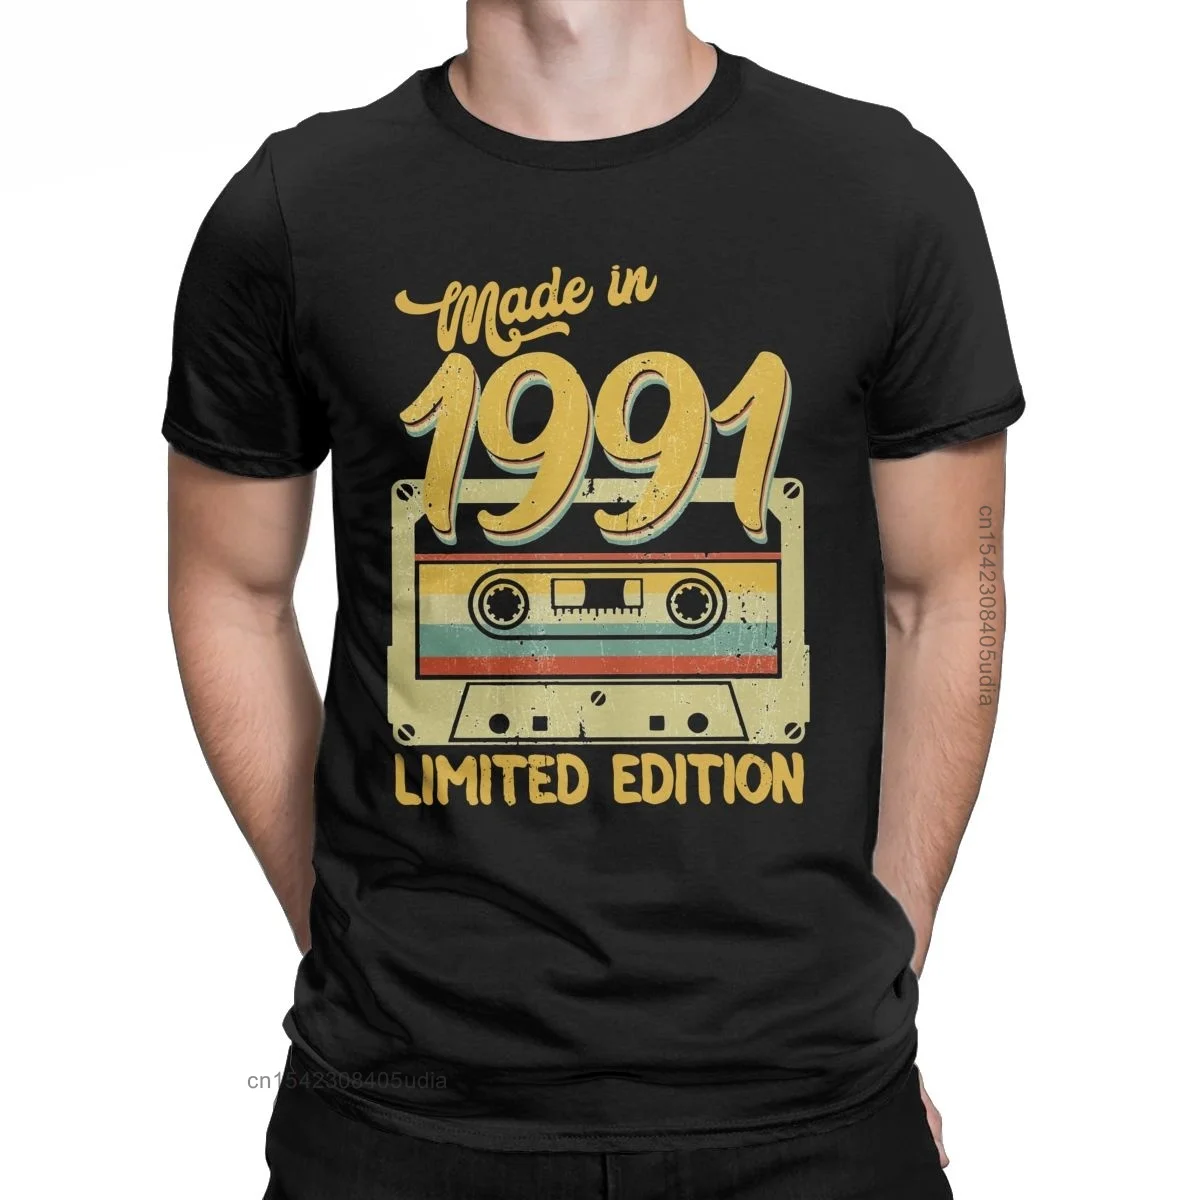 Made In 1991 Limited Edition Tshirt 30th Birthday Men T Shirt Amazing Tee Shirt for Men Cotton Camisa Streetwear